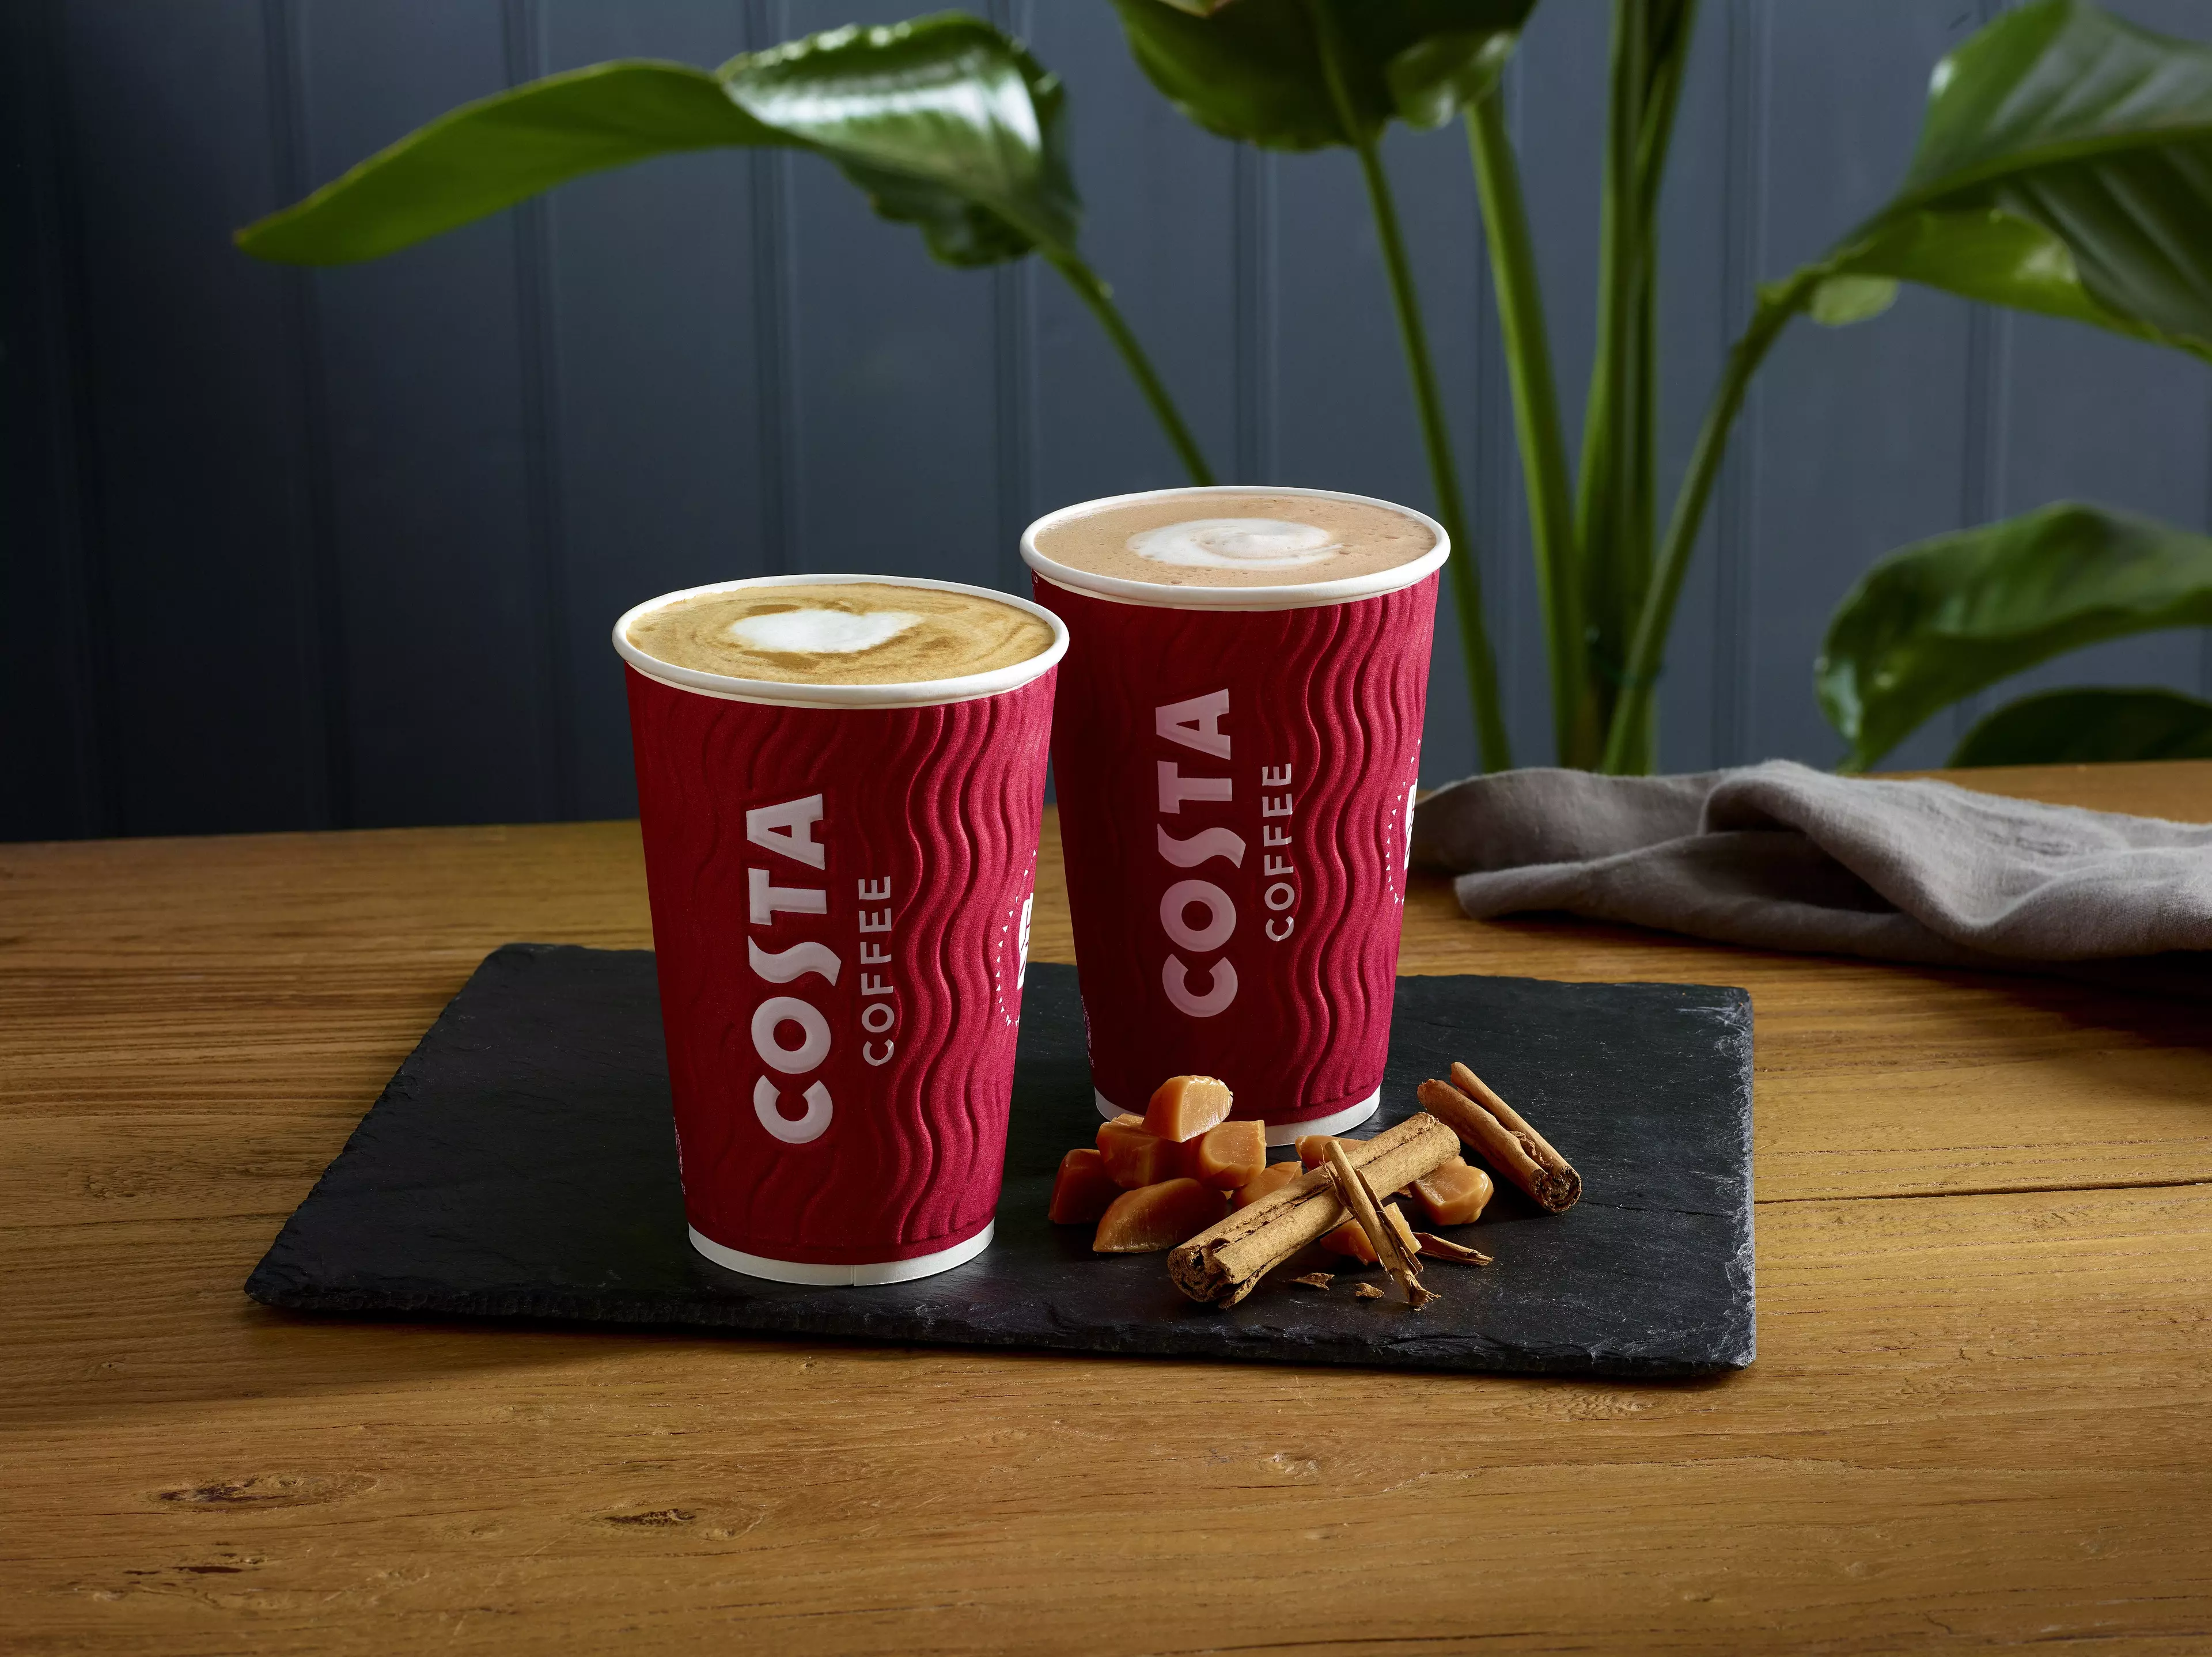 Costa Express Toffee Spiced Latte and Toffee Spiced Hot Chocolate (